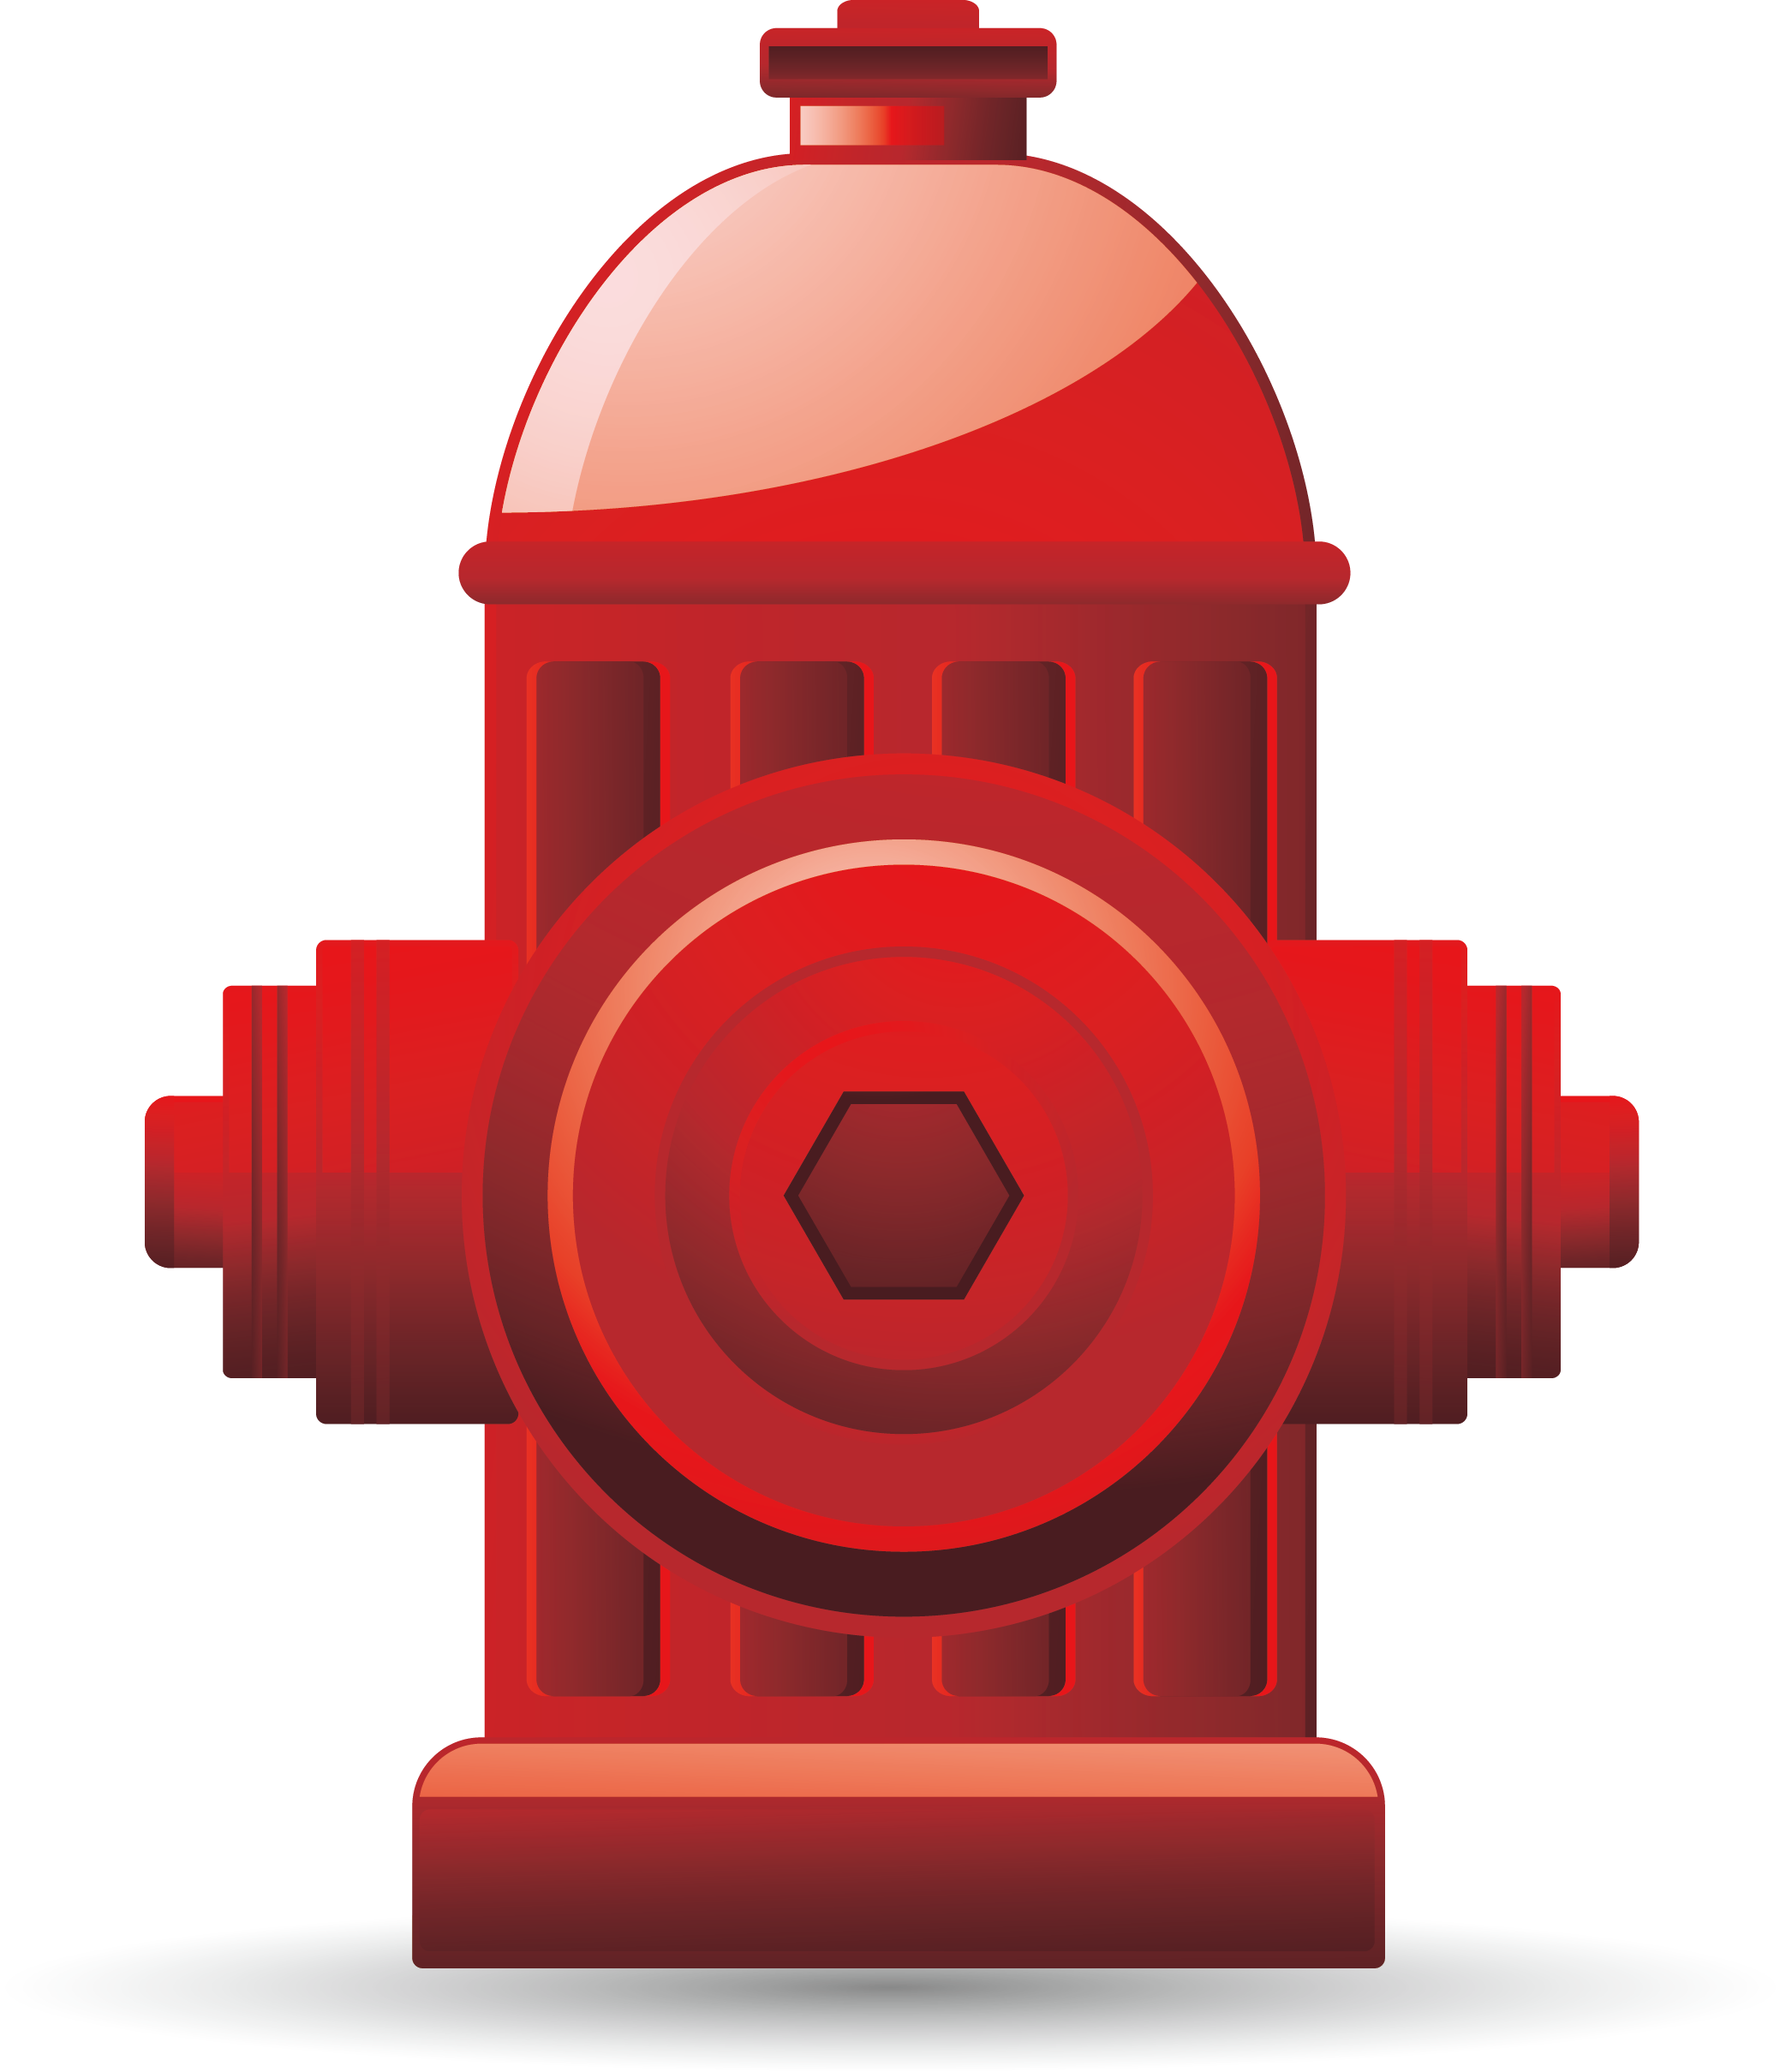 Fire Hydrant Firefighter Icon - Fire Hydrant (2078x2419)